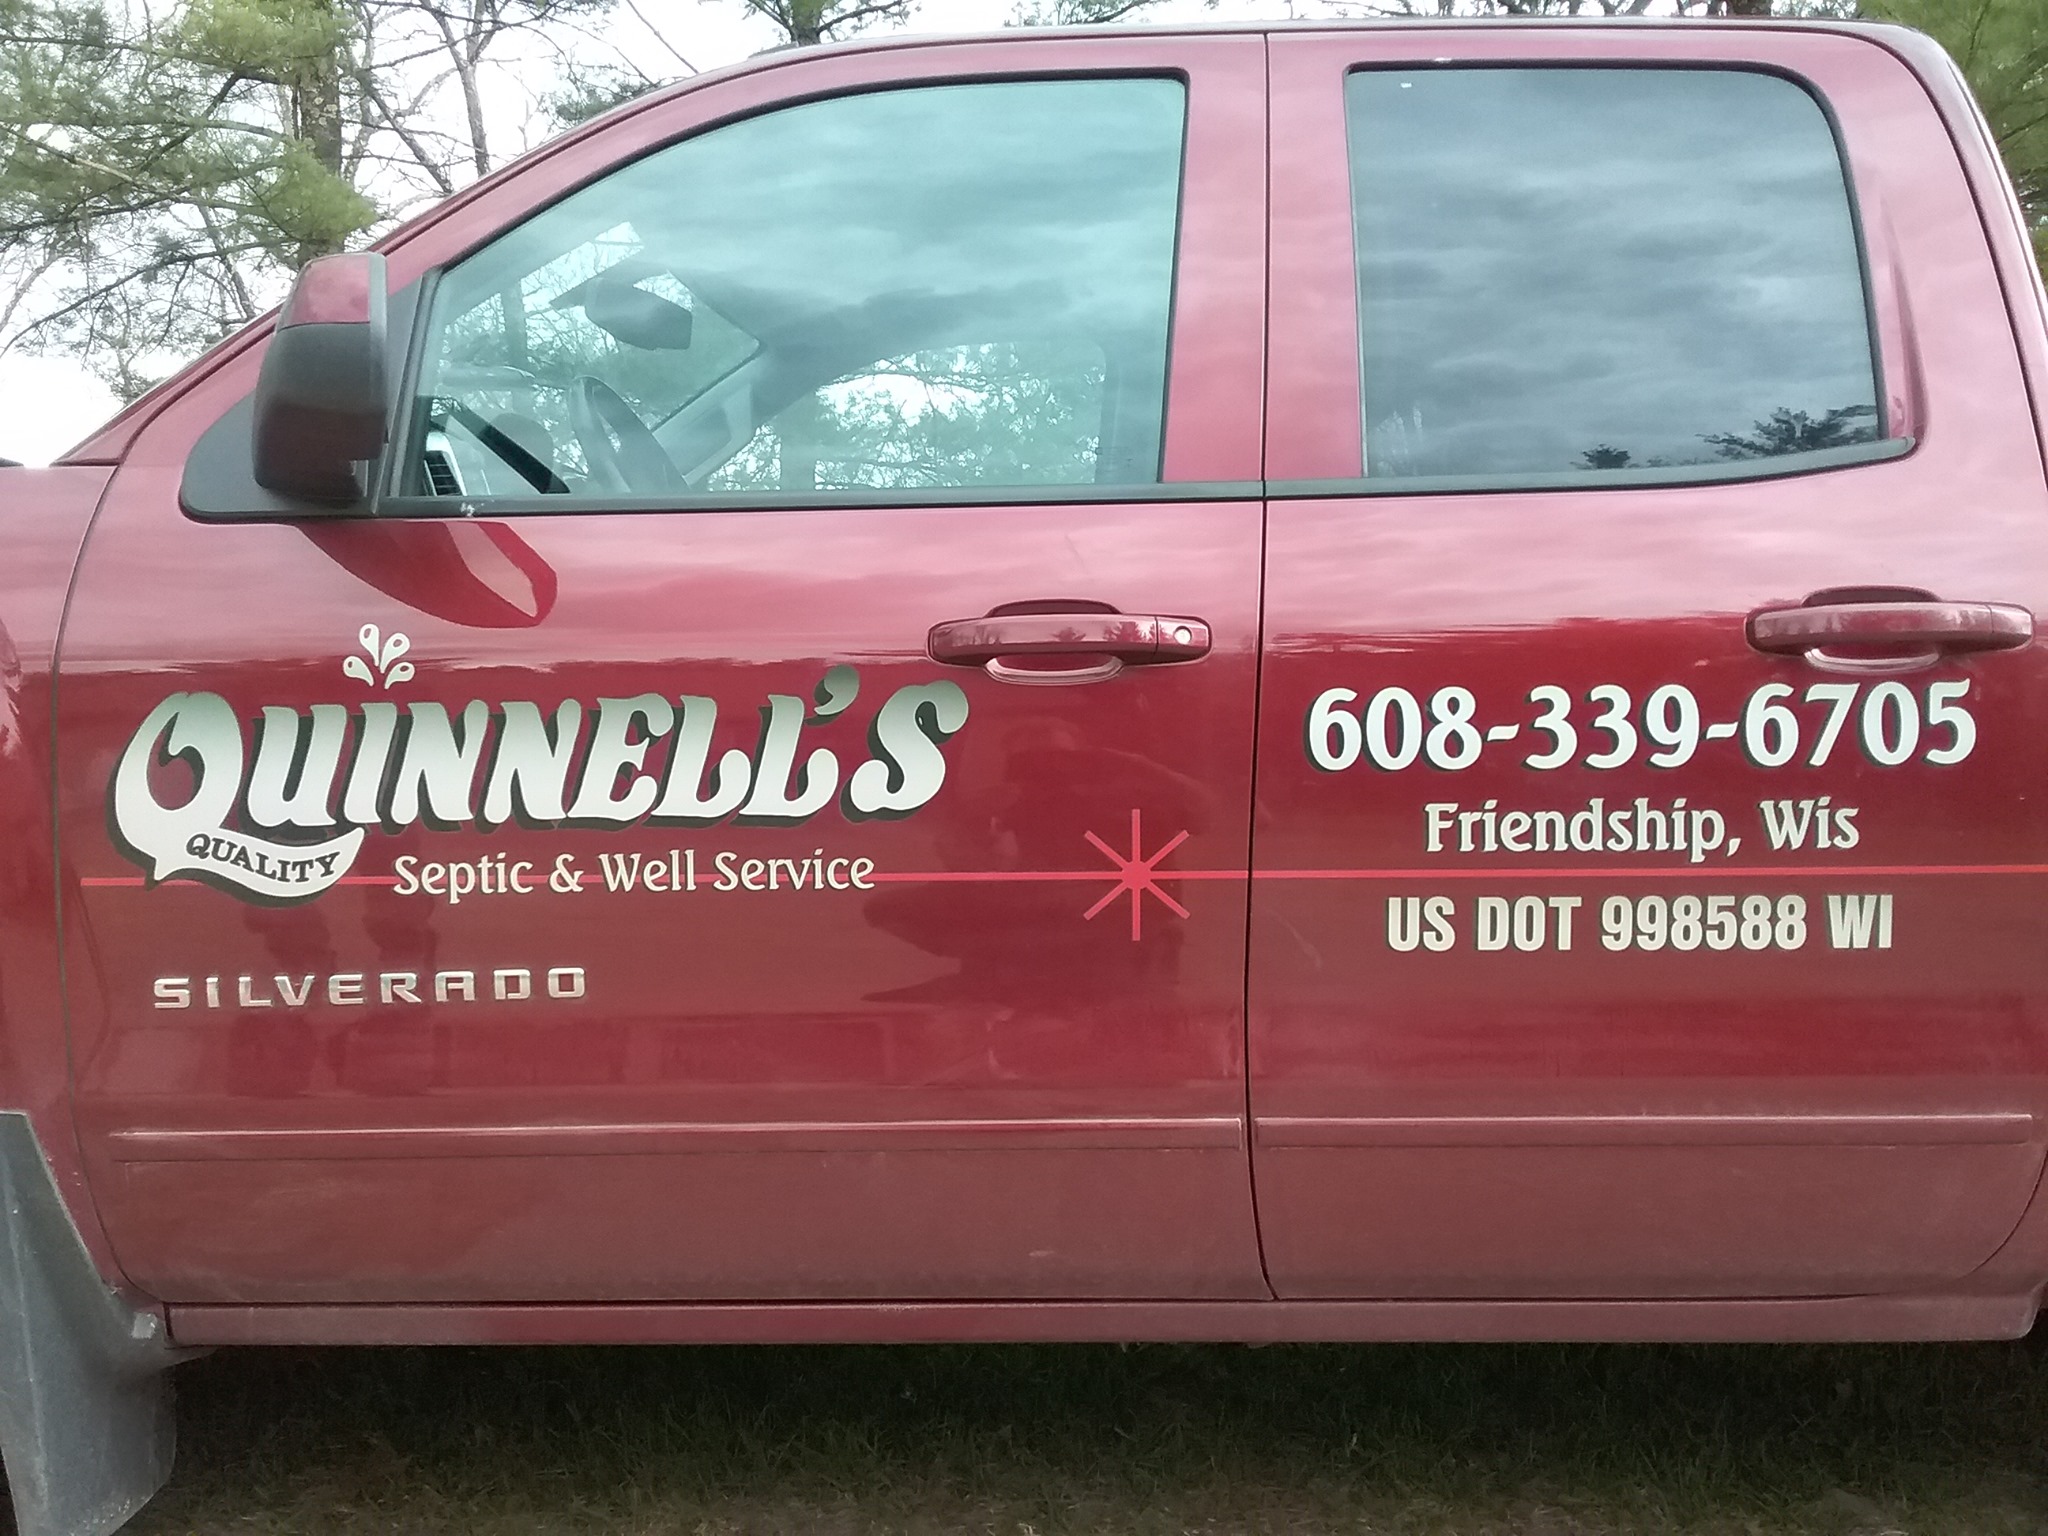 Quinnell's Septic & Well Services 1894 Dakota Ave, Friendship Wisconsin 53934